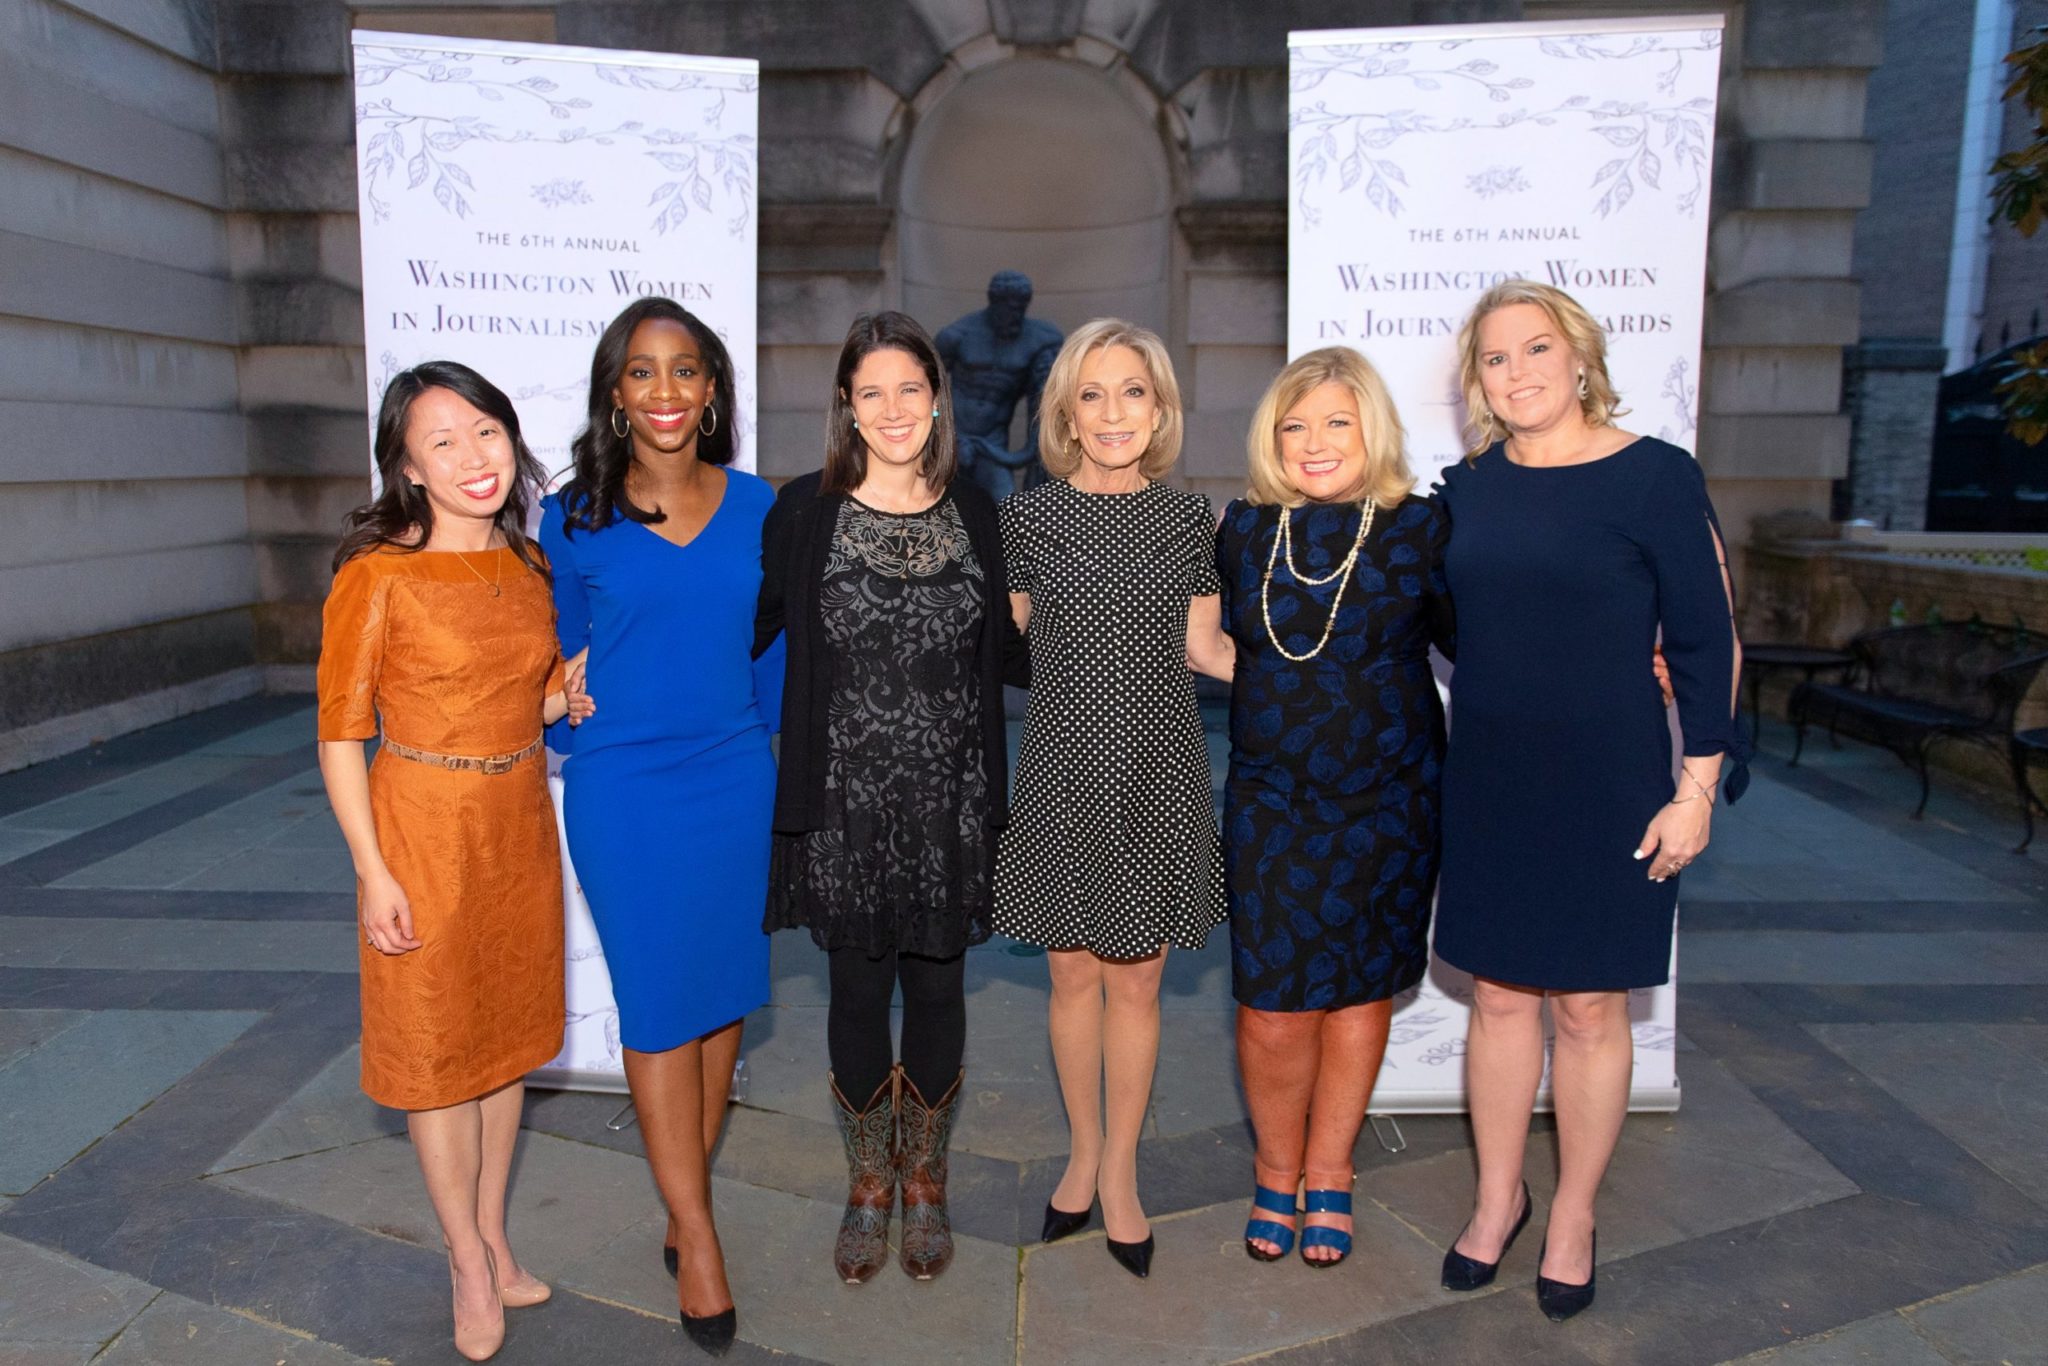 Photos From the 6th Annual Washington Women in Journalism Awards